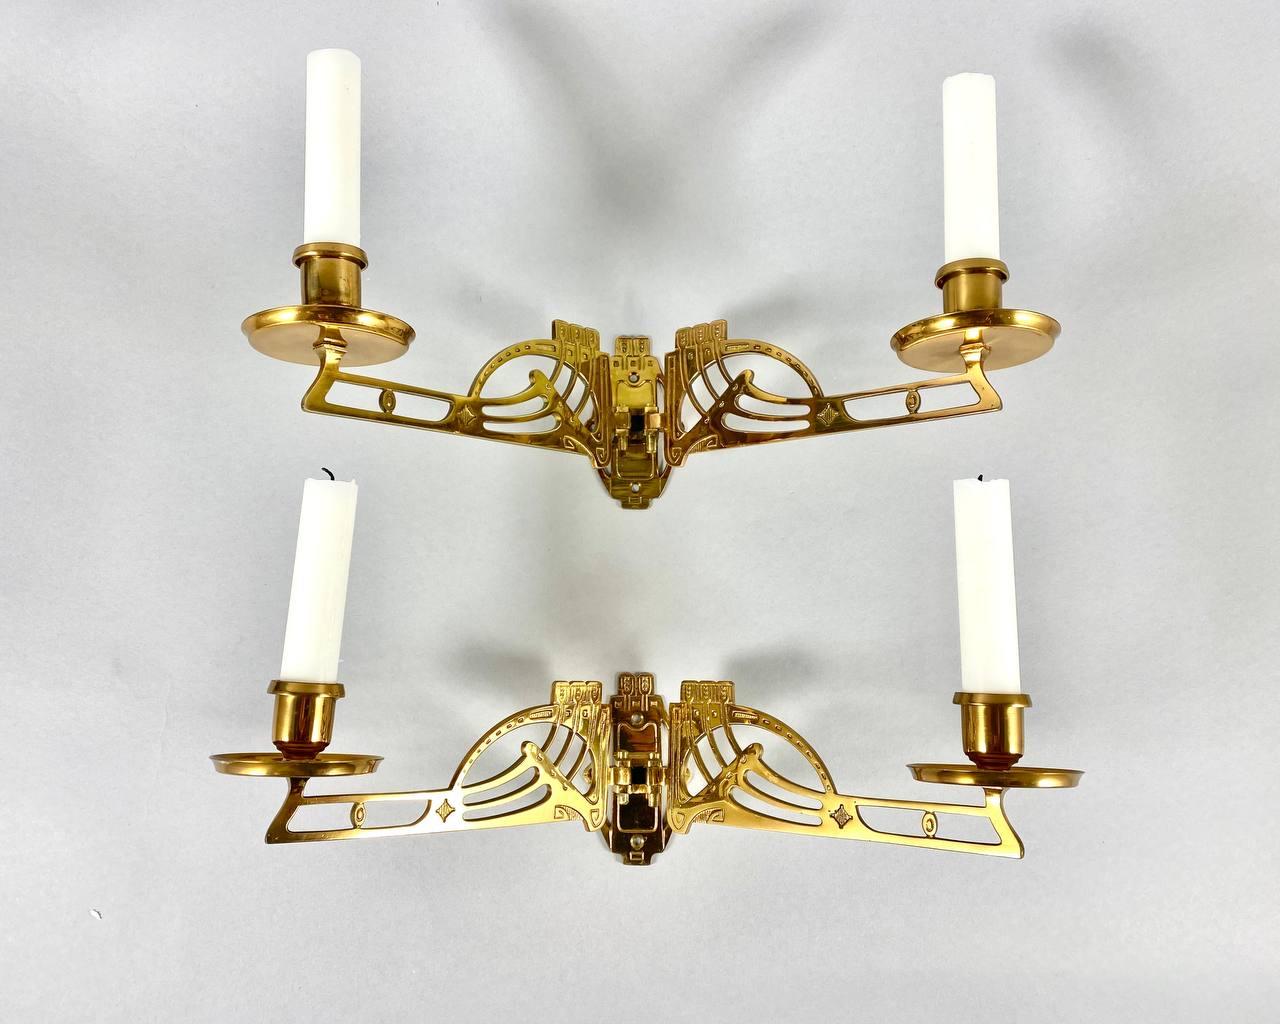 Charming Pair of Art Nouveau Style Piano Candelabra Vintage Brass Candlesticks 2